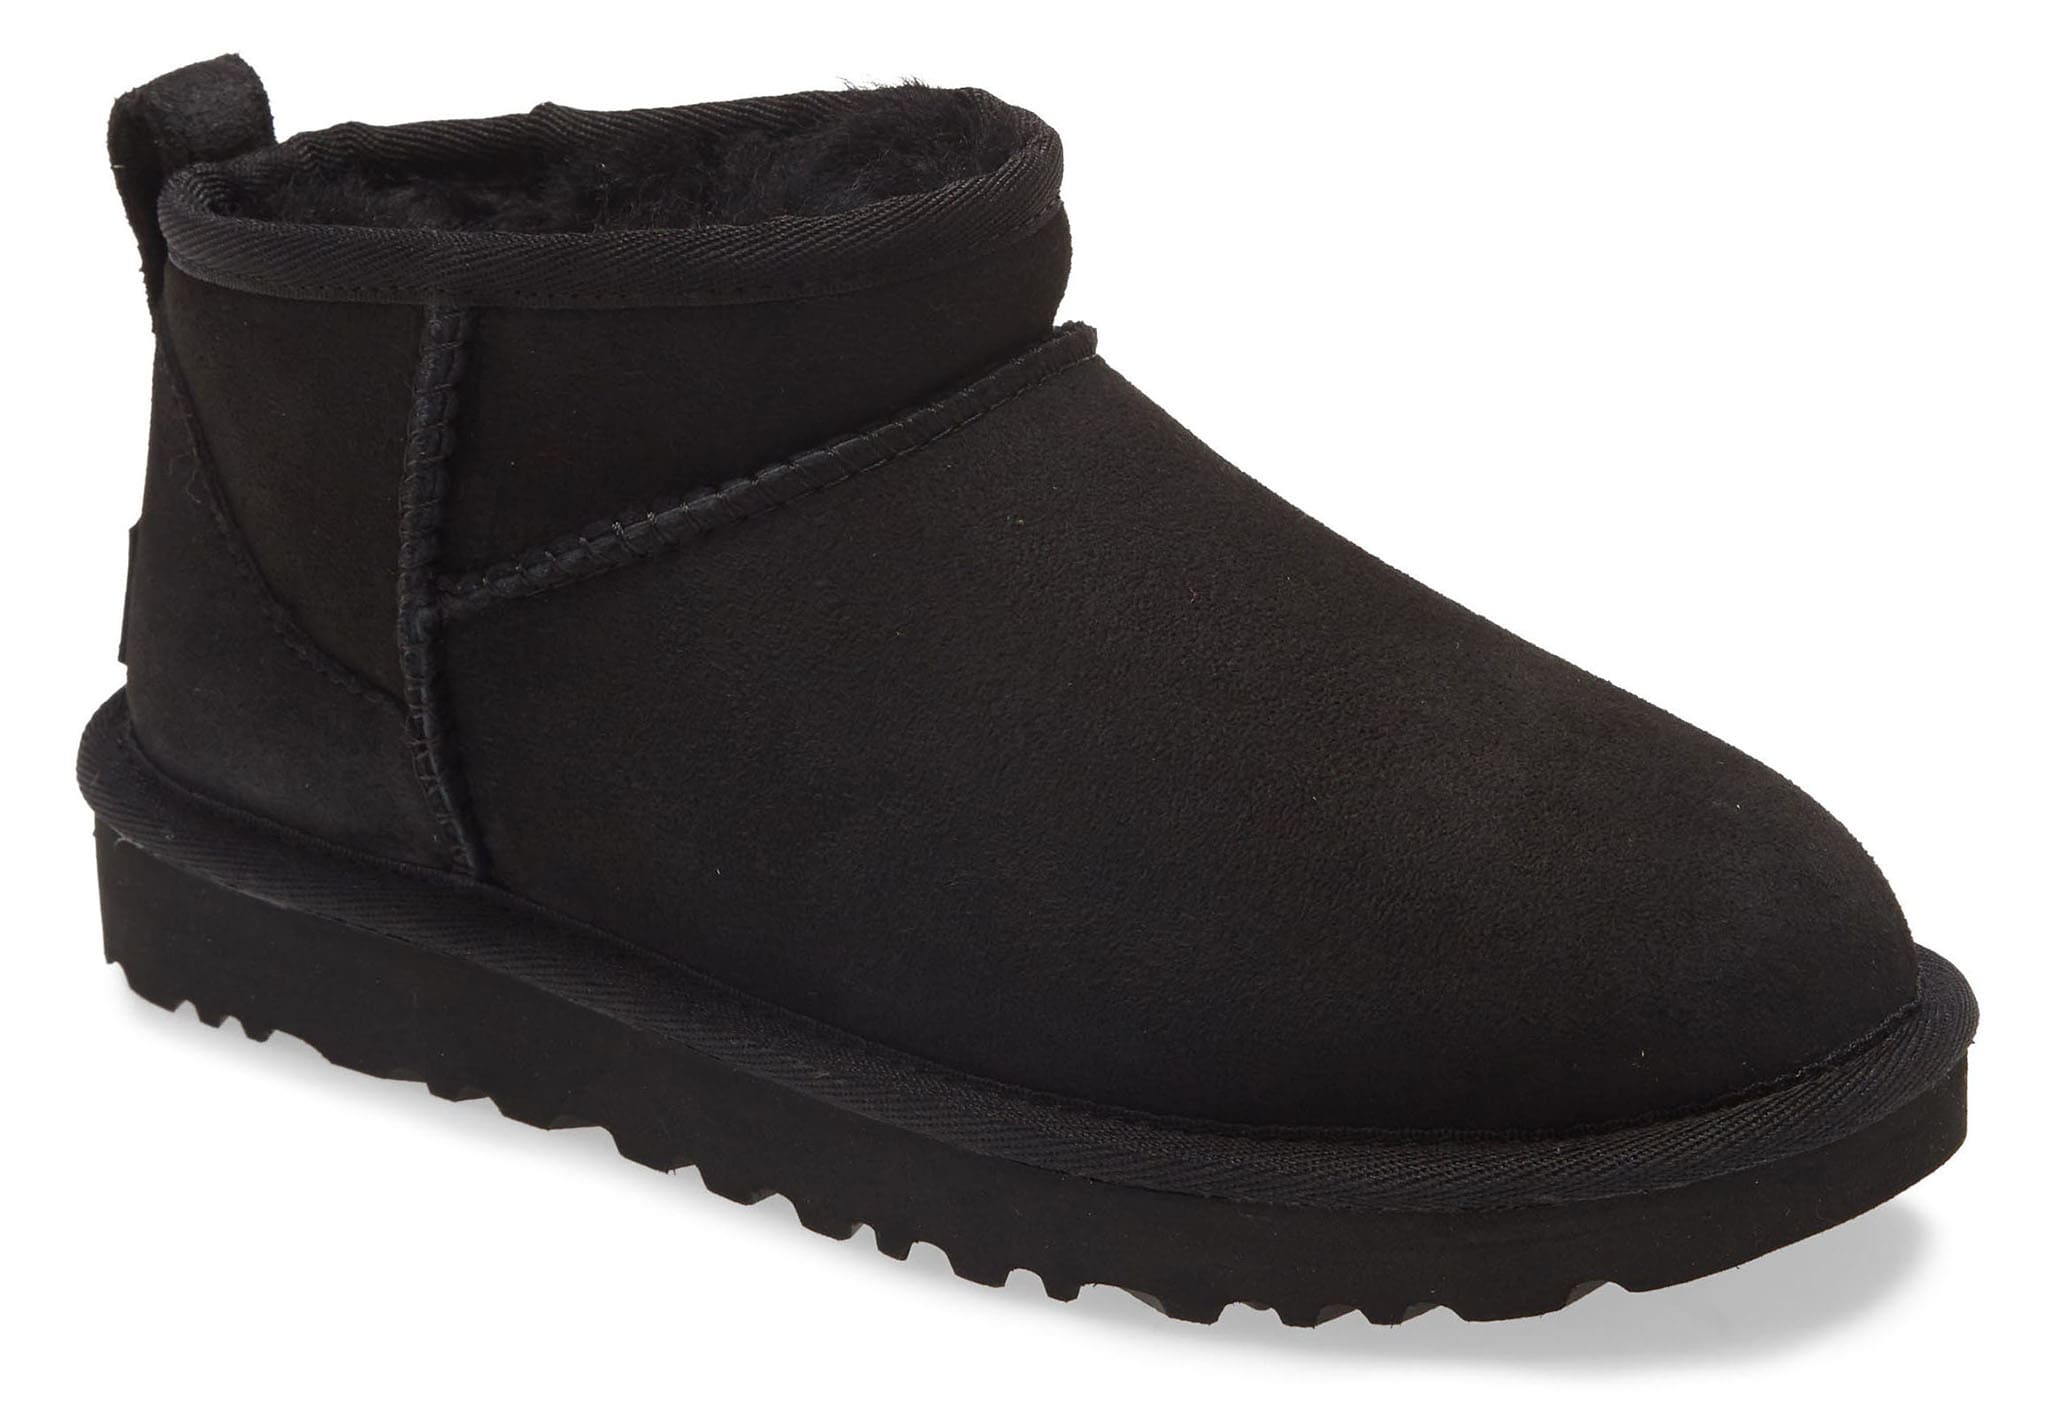 An ultra short shaft adds a twist to the classic UGG boot silhouette